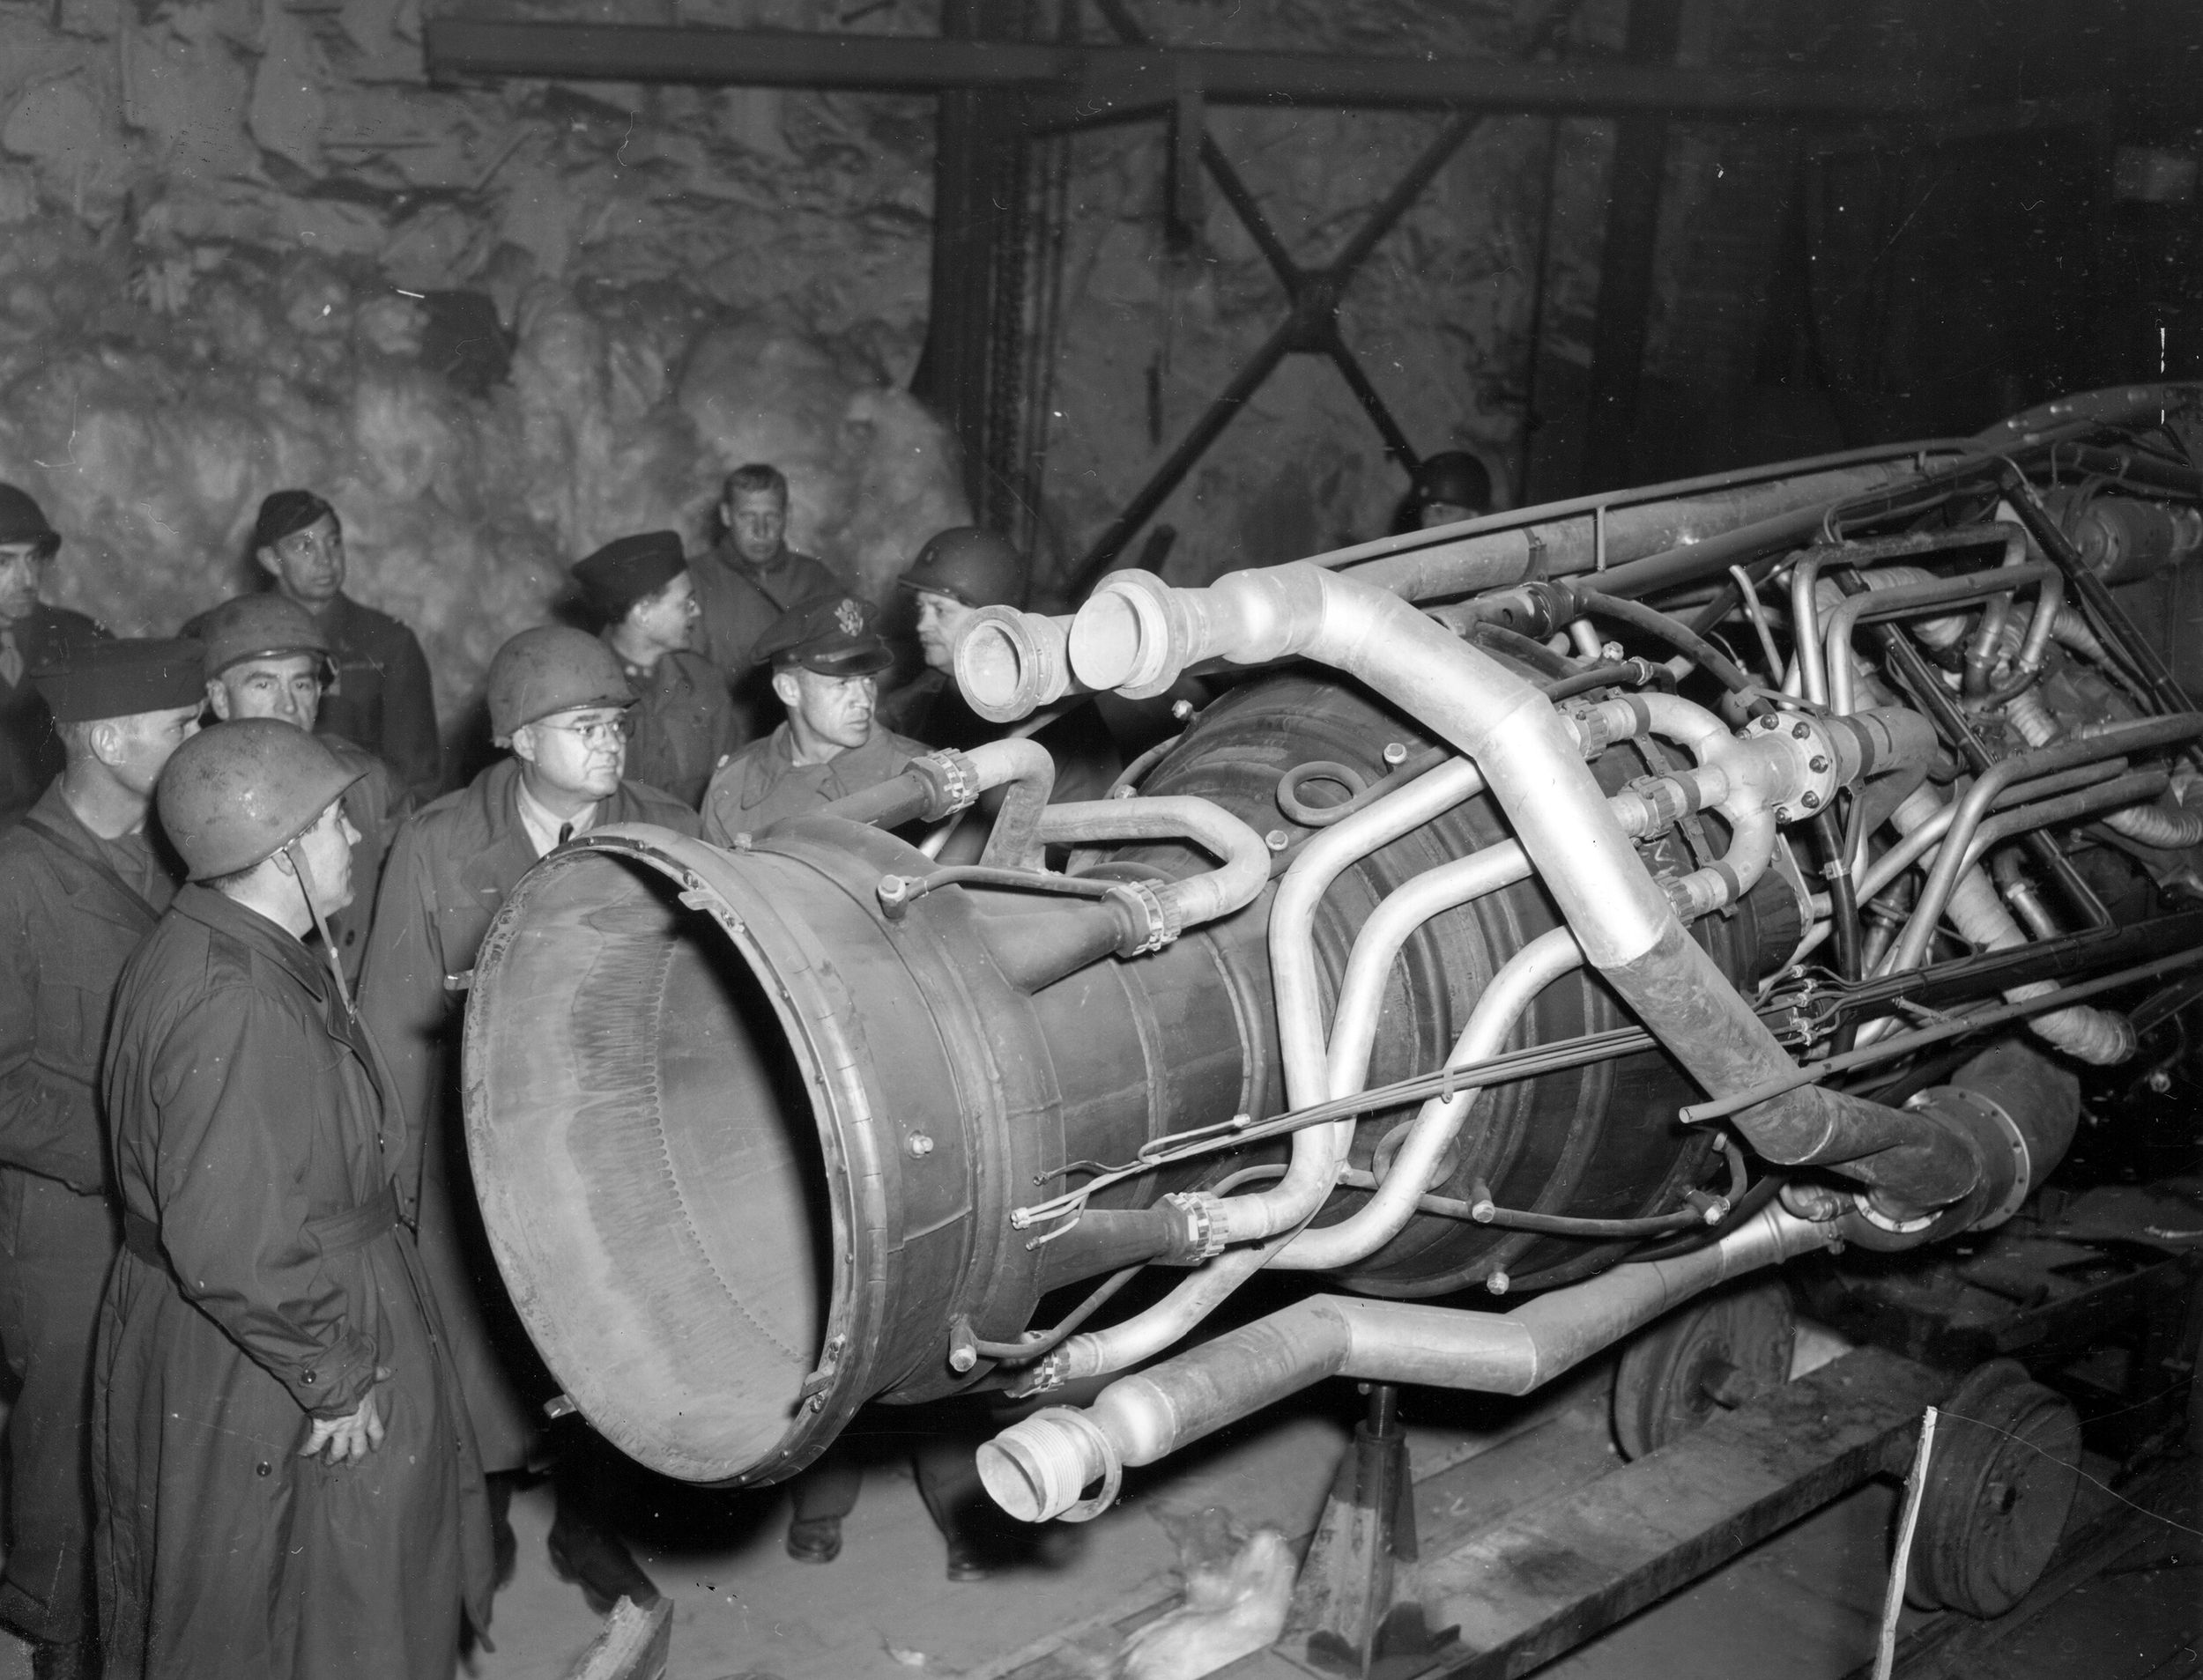 Members of a U.S. Congressional committee investigating German atrocities and war crimes inspect a rocket engine captured at an underground Nazi manufacturing facility at Nordhausen. A top American priority, Operation Paperclip was tasked with gathering German scientists and rocket technology for development in the U.S. after World War II.